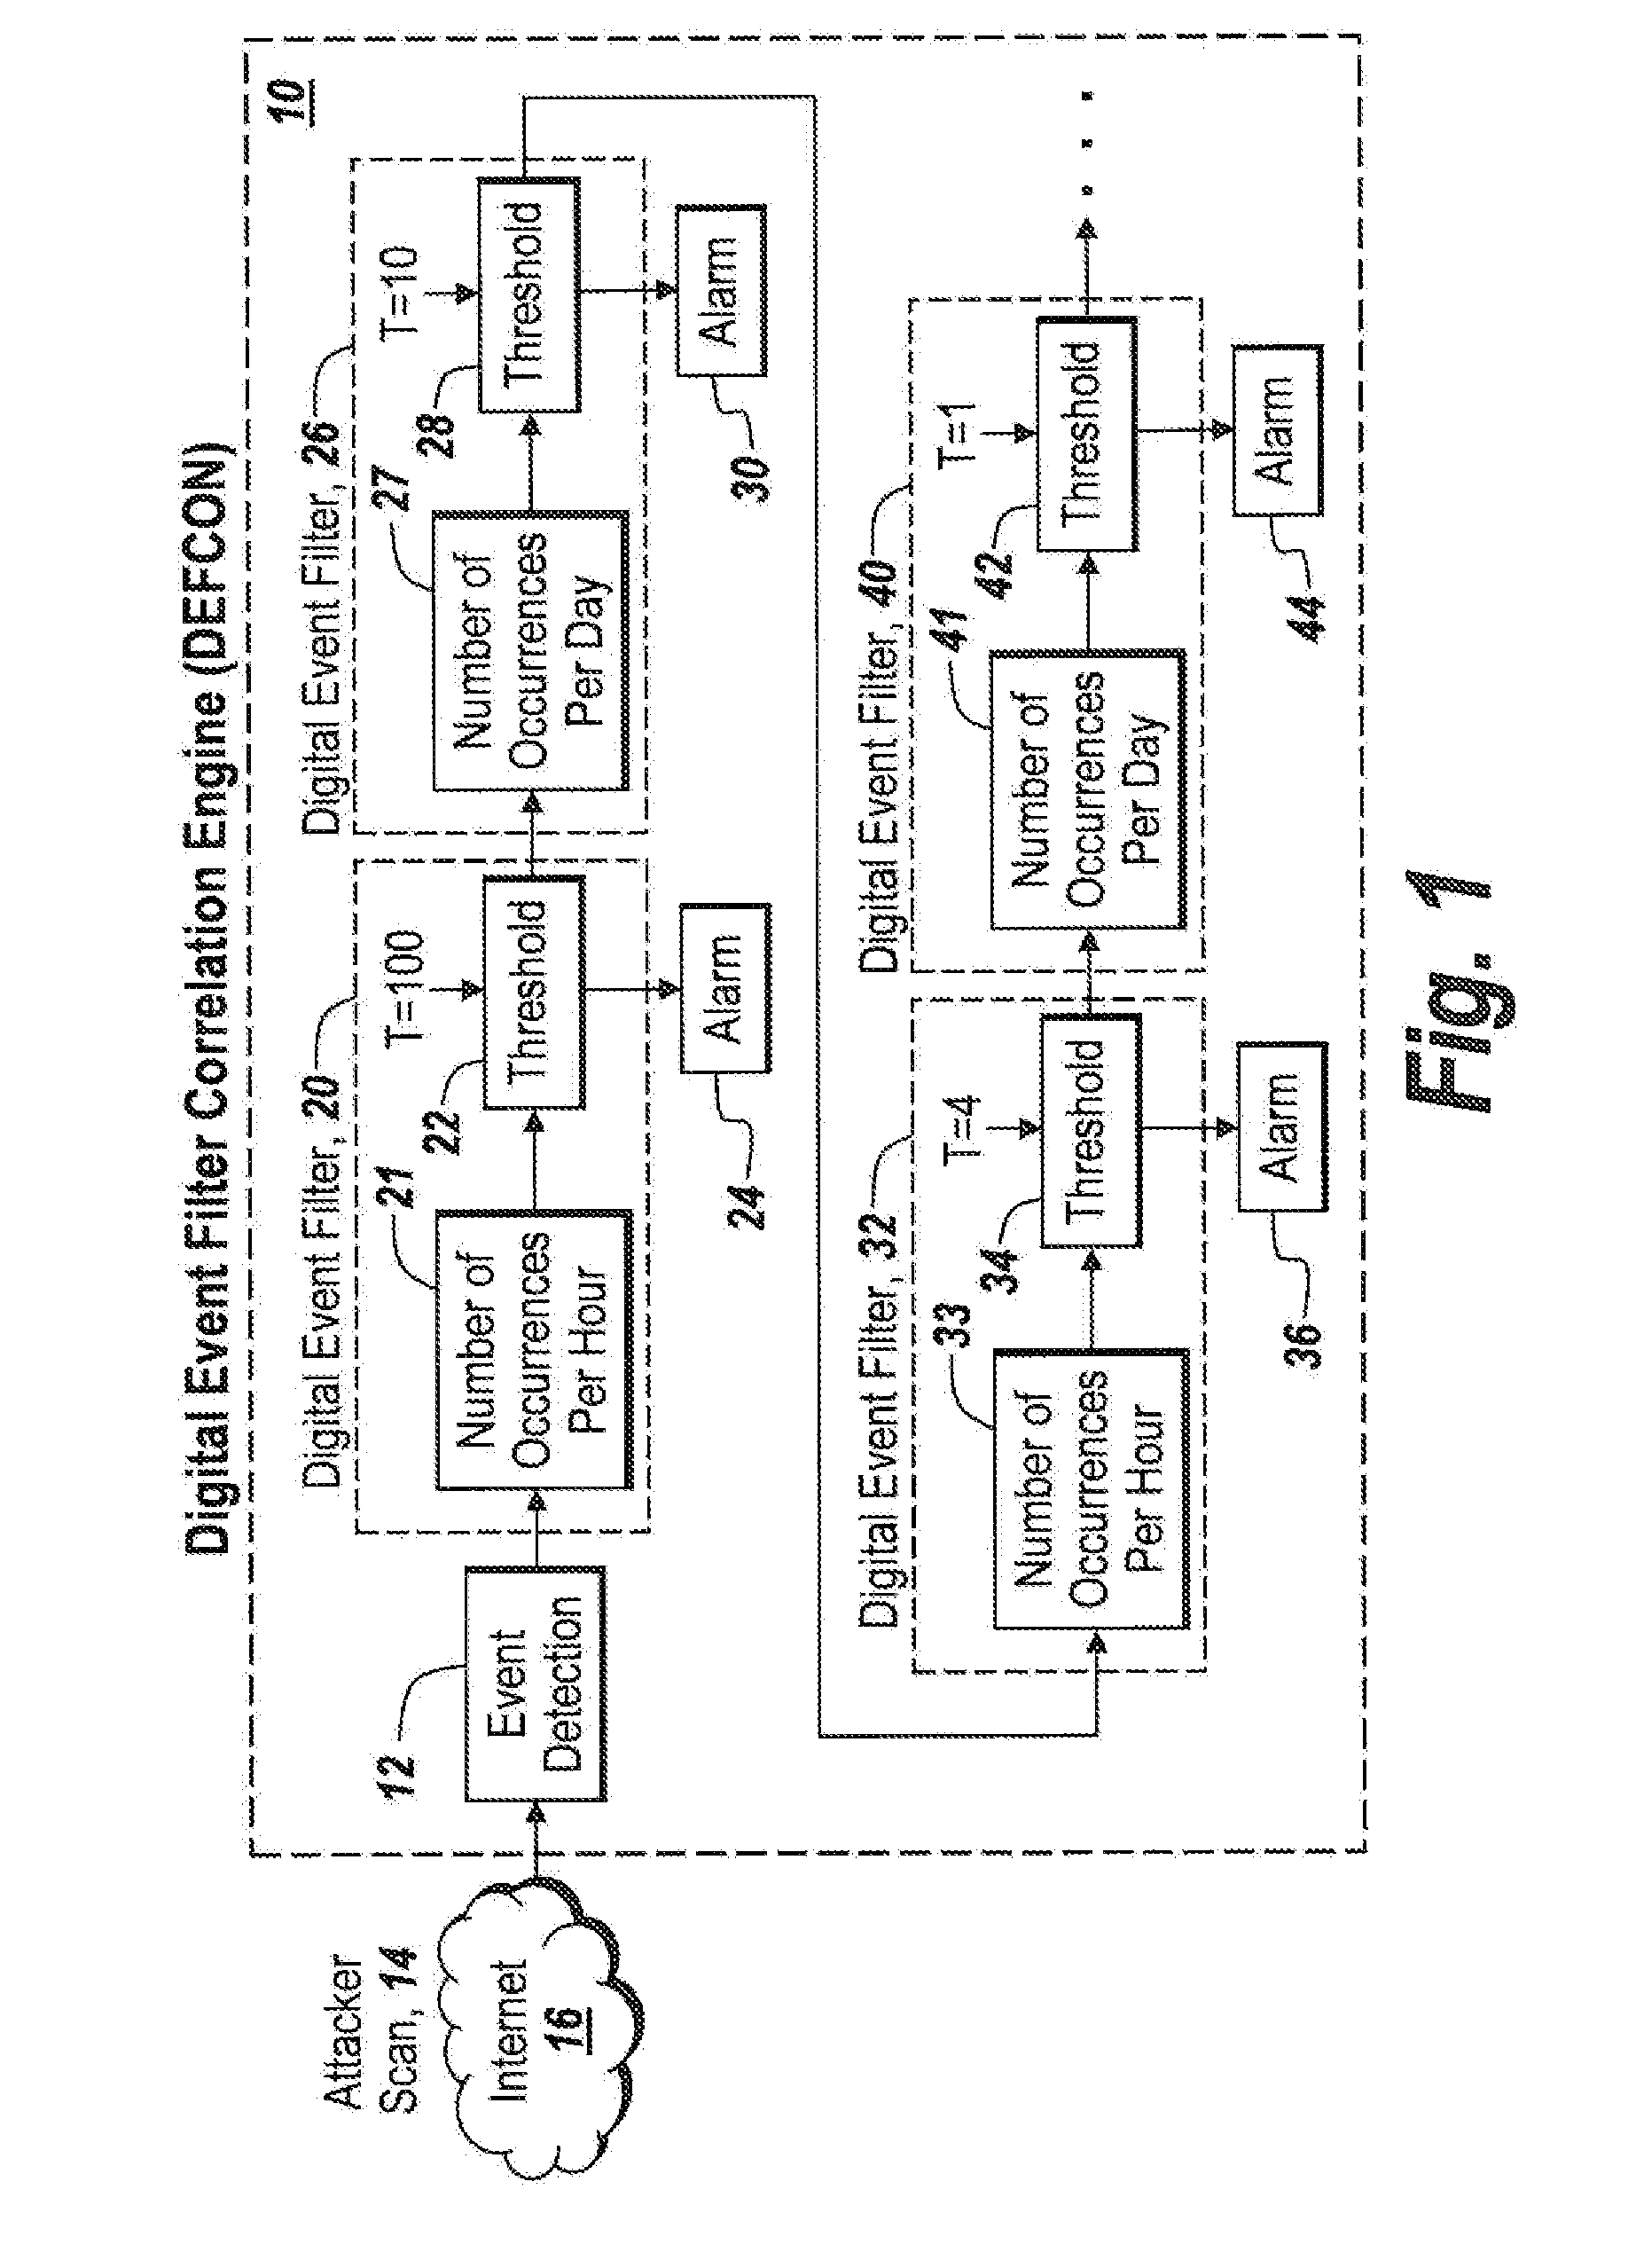 Method and apparatus for detecting ssh login attacks